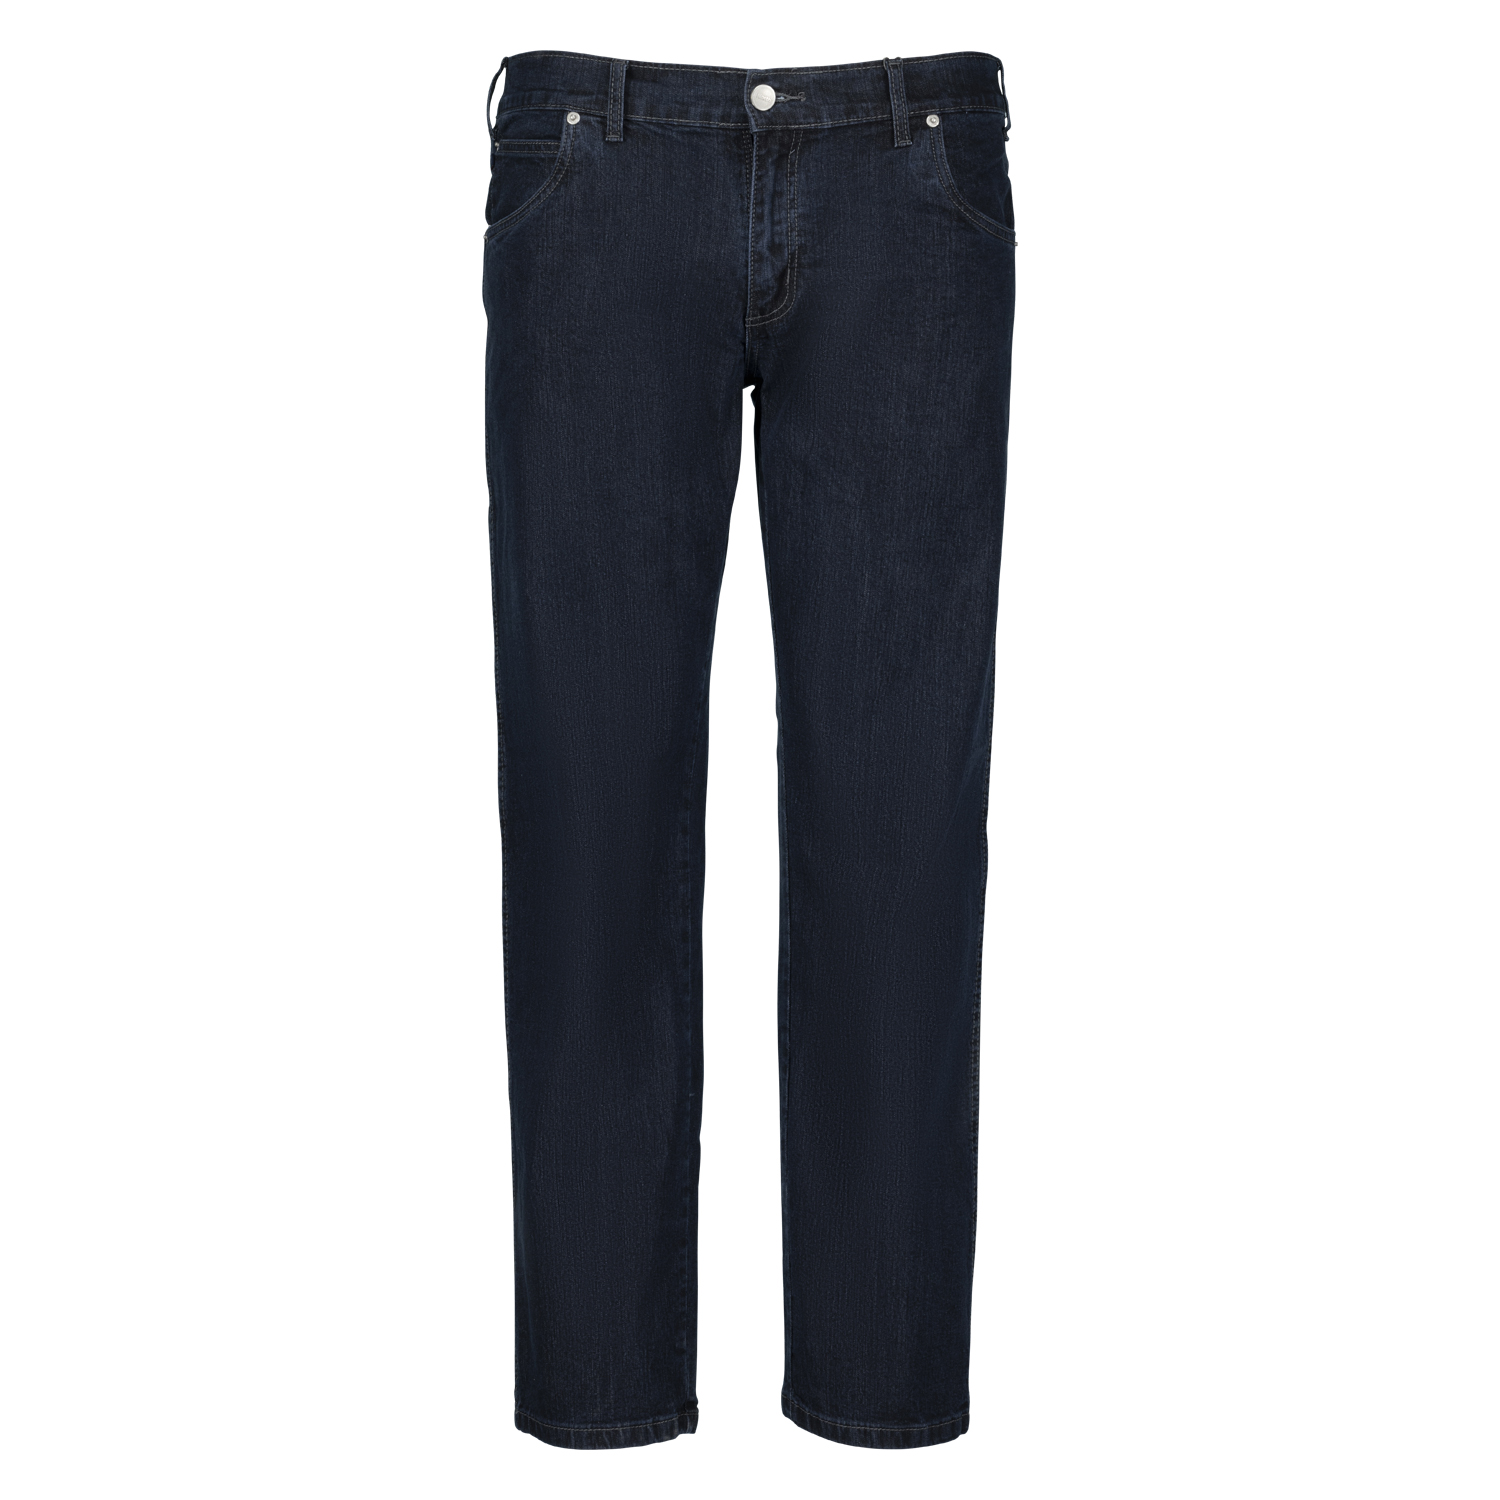 Blue stone washed Jeans for men by North 56°4 in oversizes up to 70/34